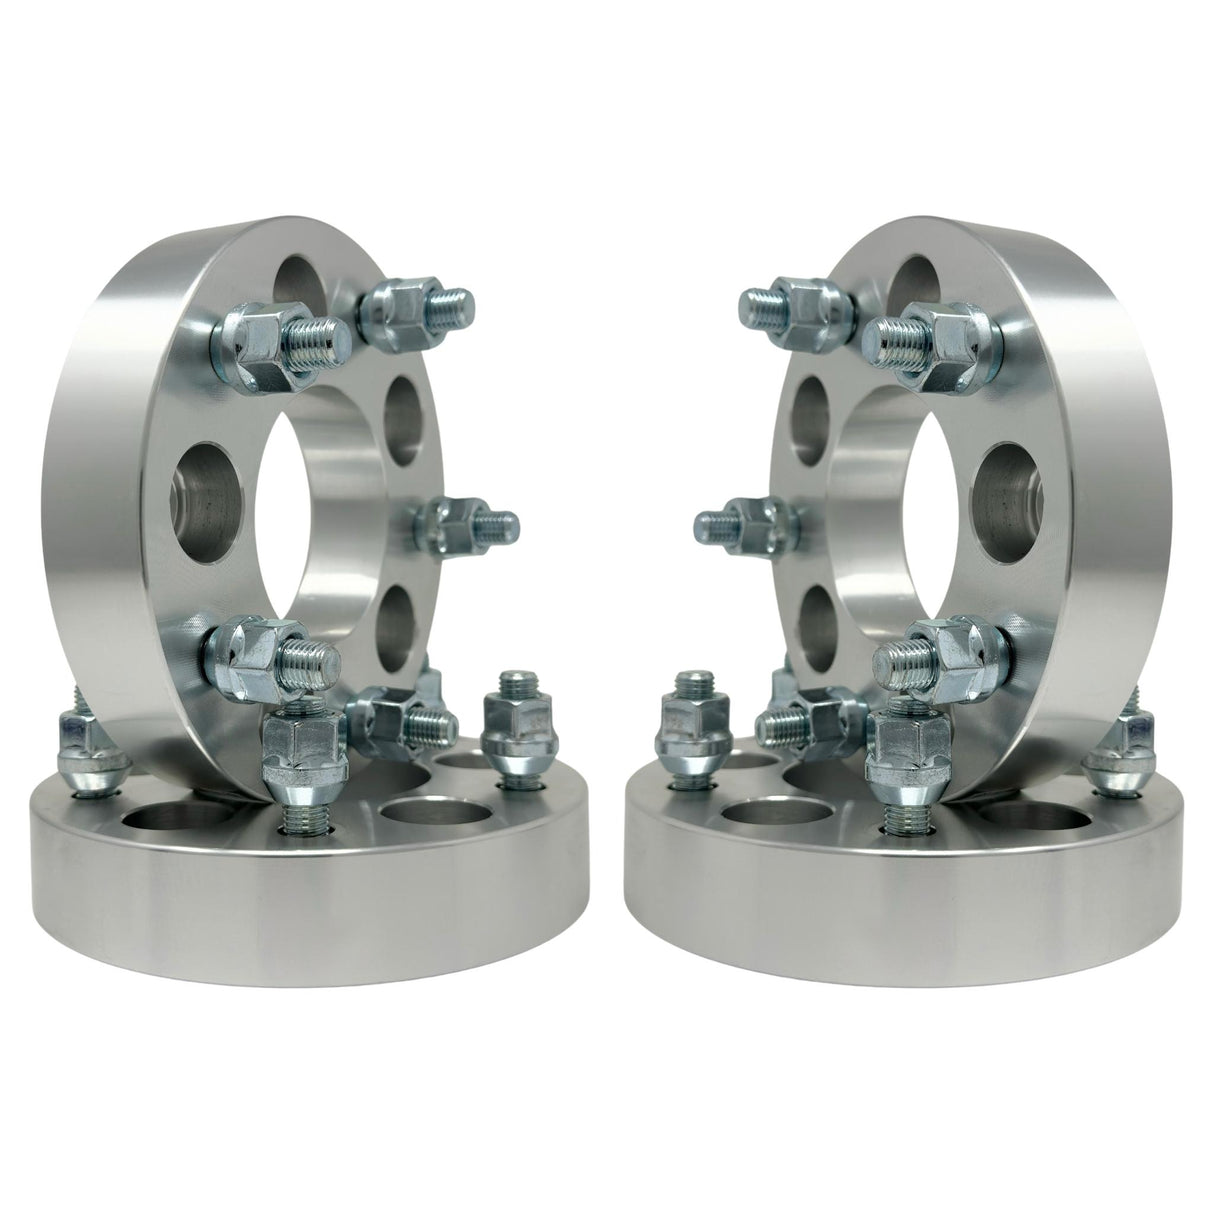 5x4.75 to 5x5 Wheel Adapters 1.25" Inch (32mm) 1/2"-20 Studs & Lug Nuts 74mm Center Bore | 5x120.7 to 5x127